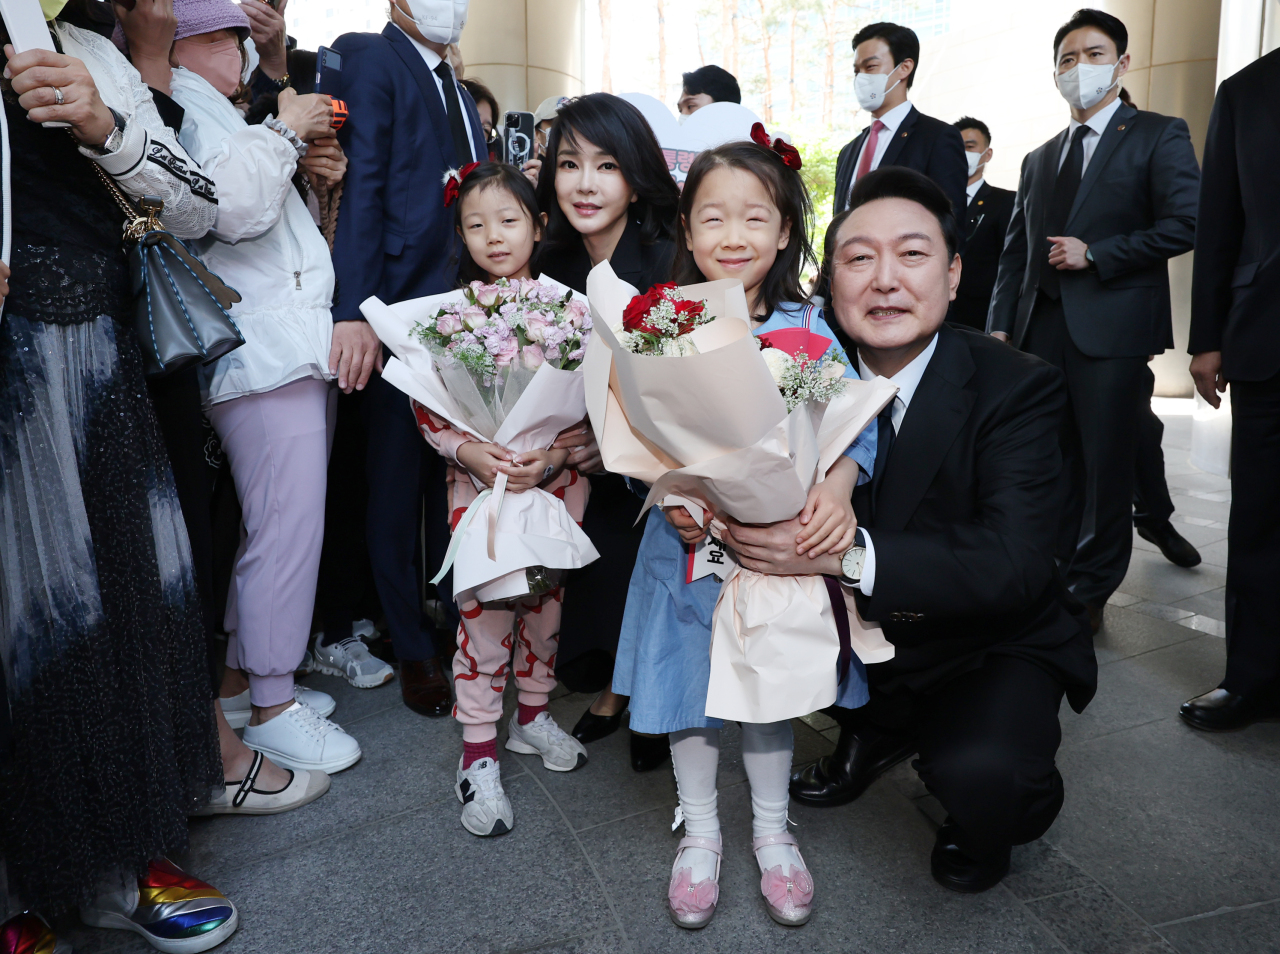 President Yoon Suk-yeol and first lady Kim Keon-hee receive bouquets from children as they leave their private home in southern Seoul on Tuesday morning for the inauguration ceremony. (Yonhap)